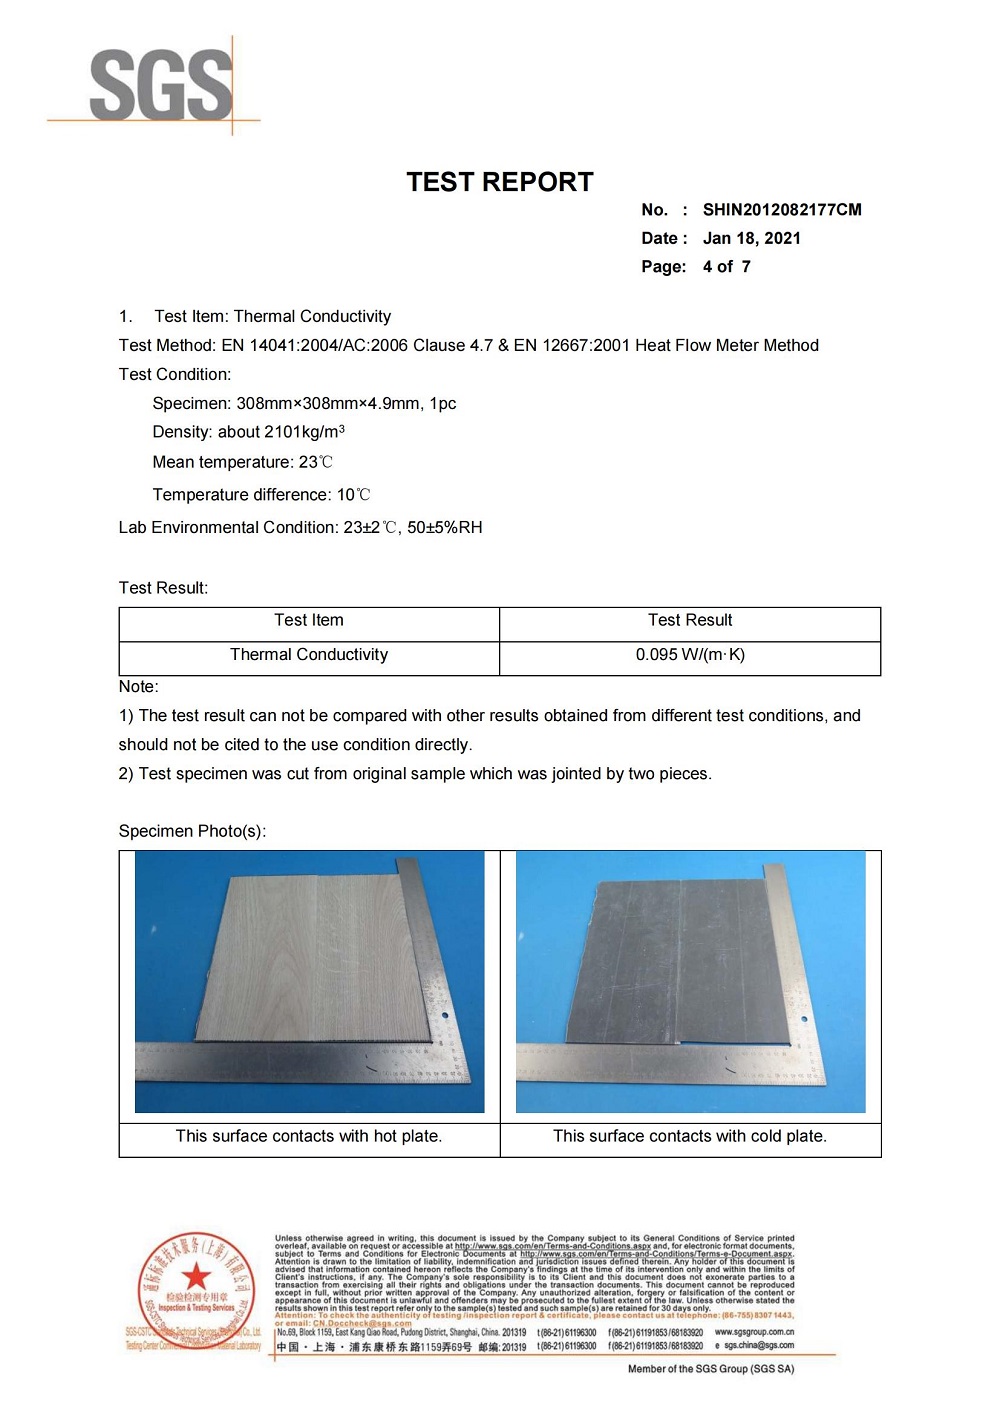 Thermal Conductivity Test Report_03